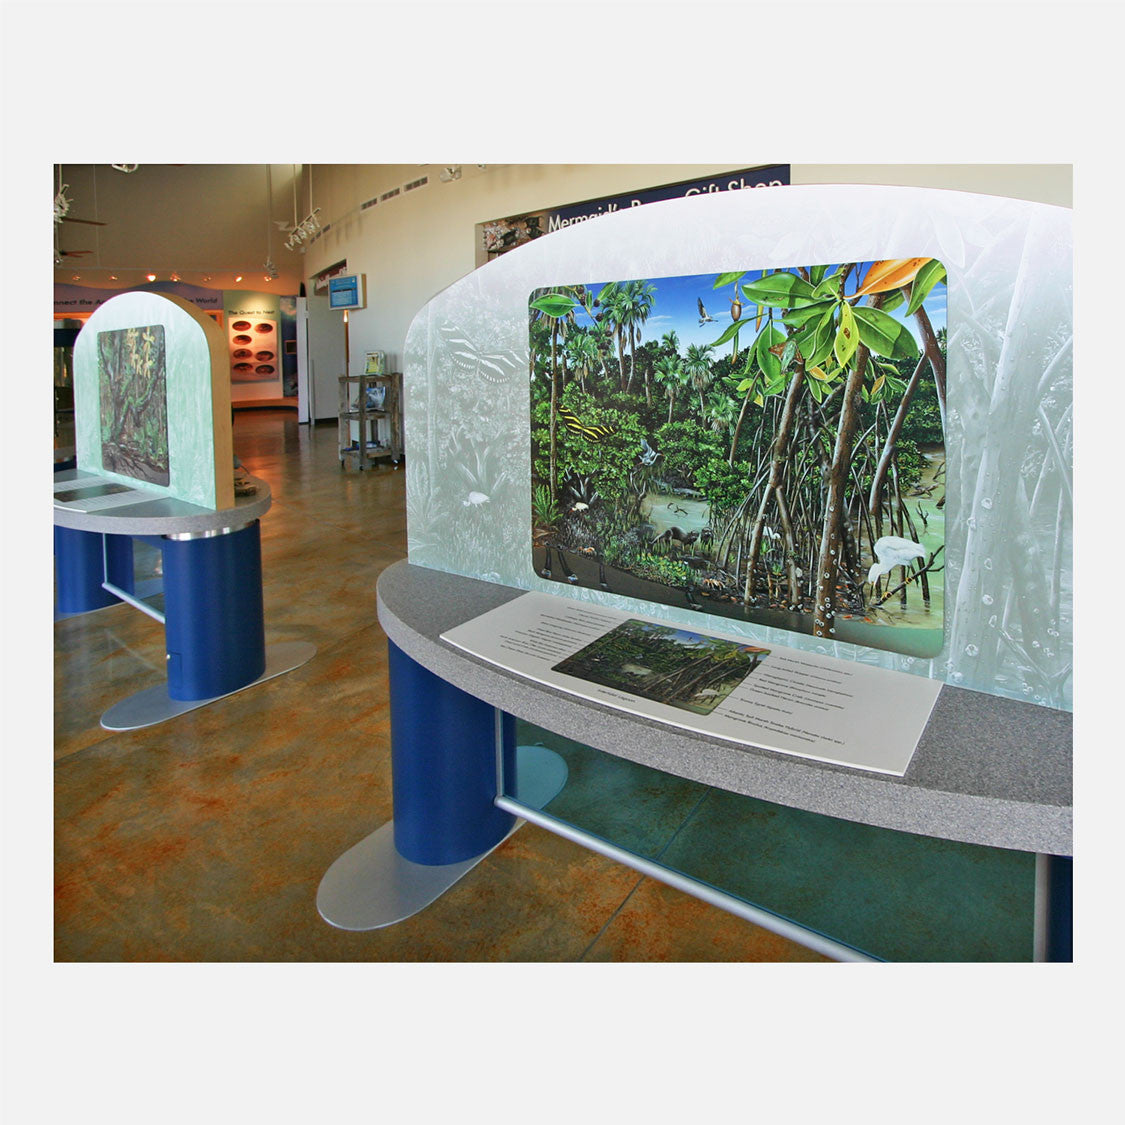 This beautifully illustrated display describes the flora and fauna of the intertidal habitat of an east coast Florida barrier island. 